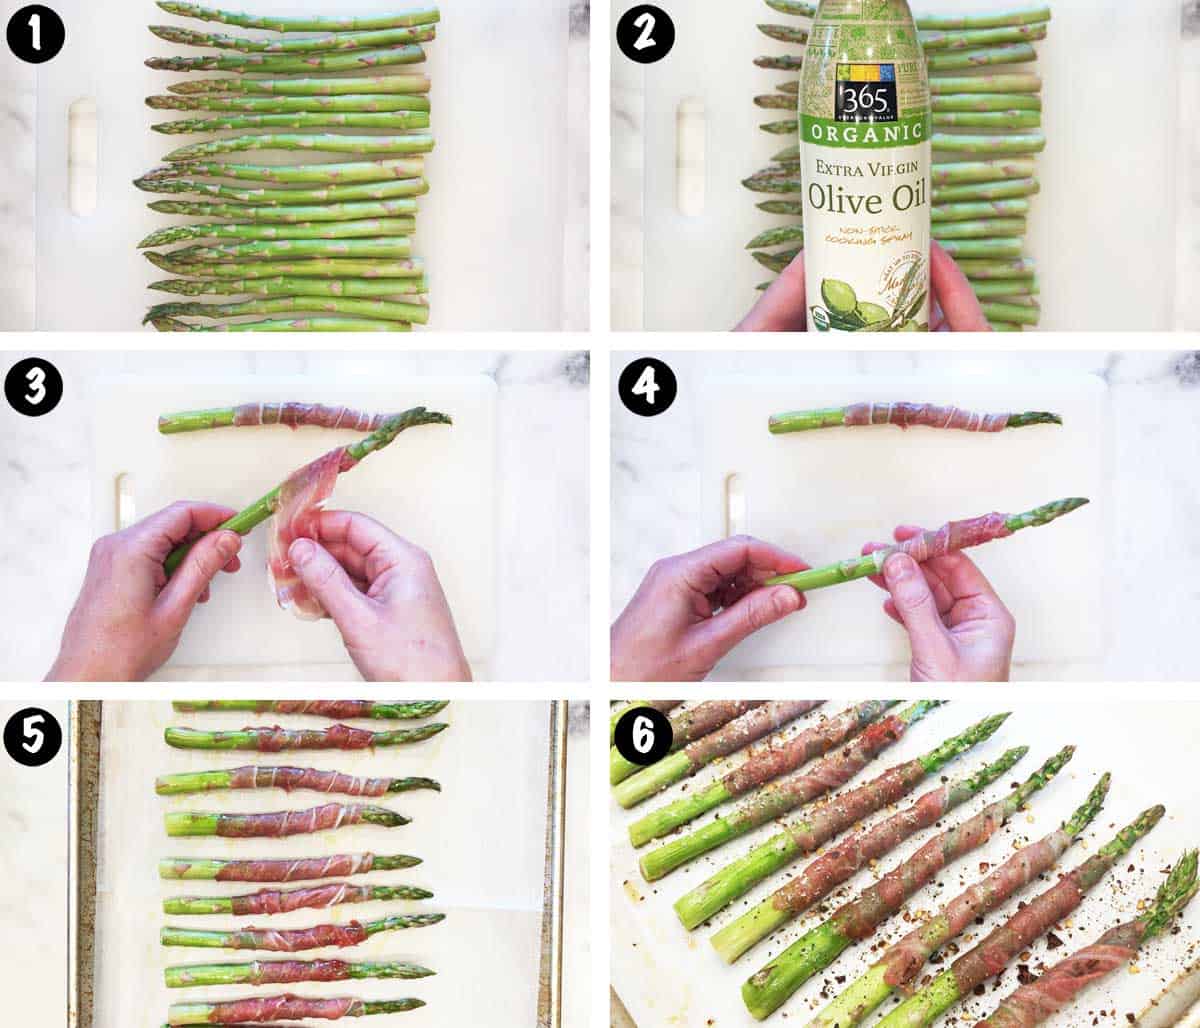 A six-photo collage showing the steps for making prosciutto-wrapped asparagus.